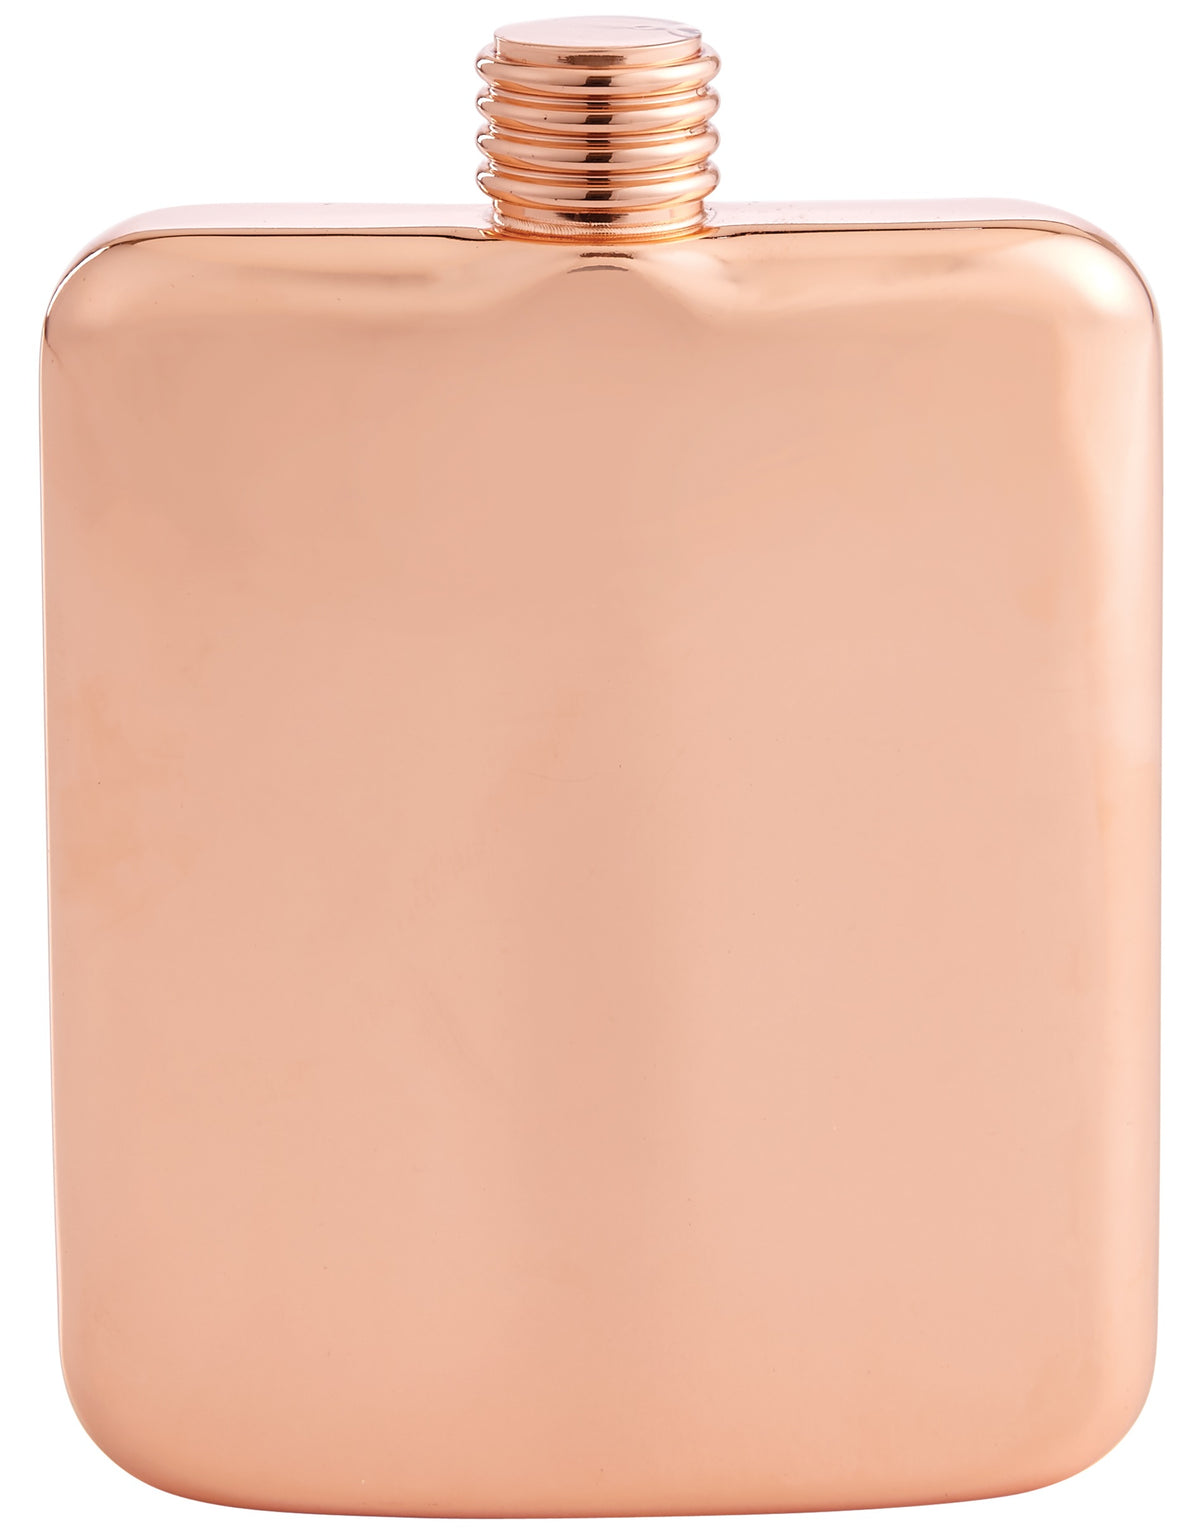 Harold Import 48031 Hip Flask, Copper-Plated